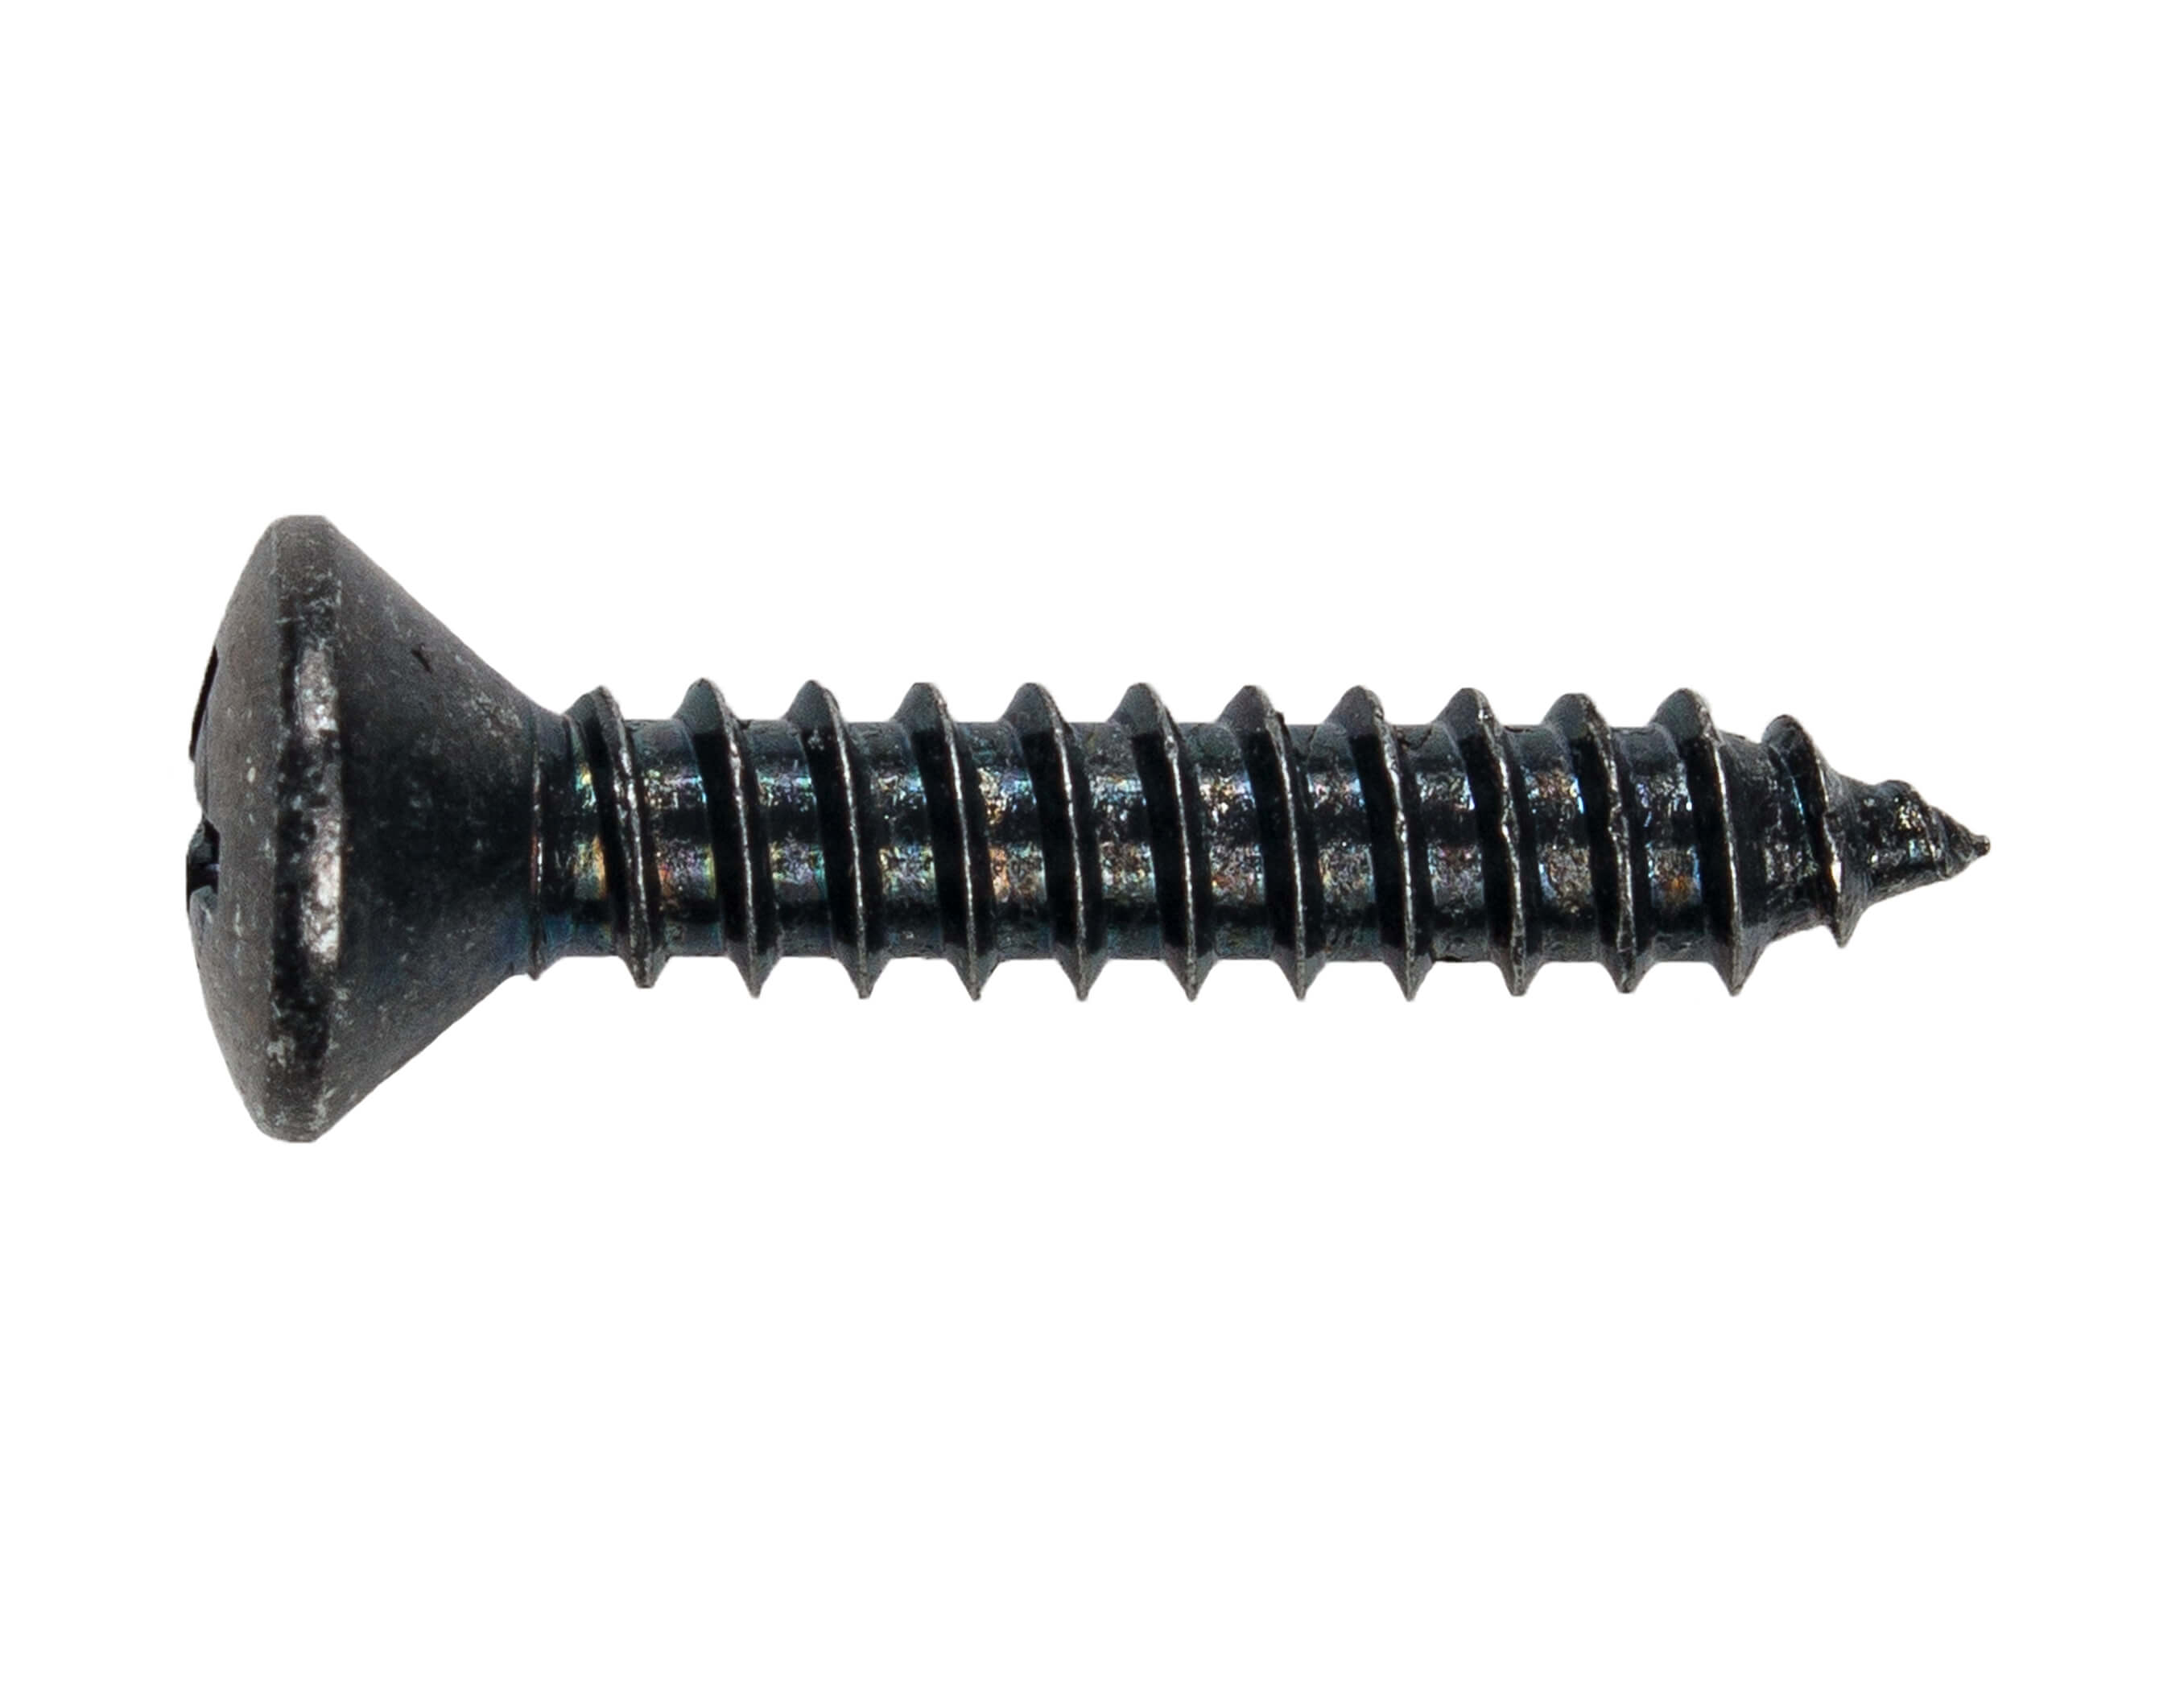 4.2X32 SMS (TAPPING) SCREW OVAL PH BLK DIN7983